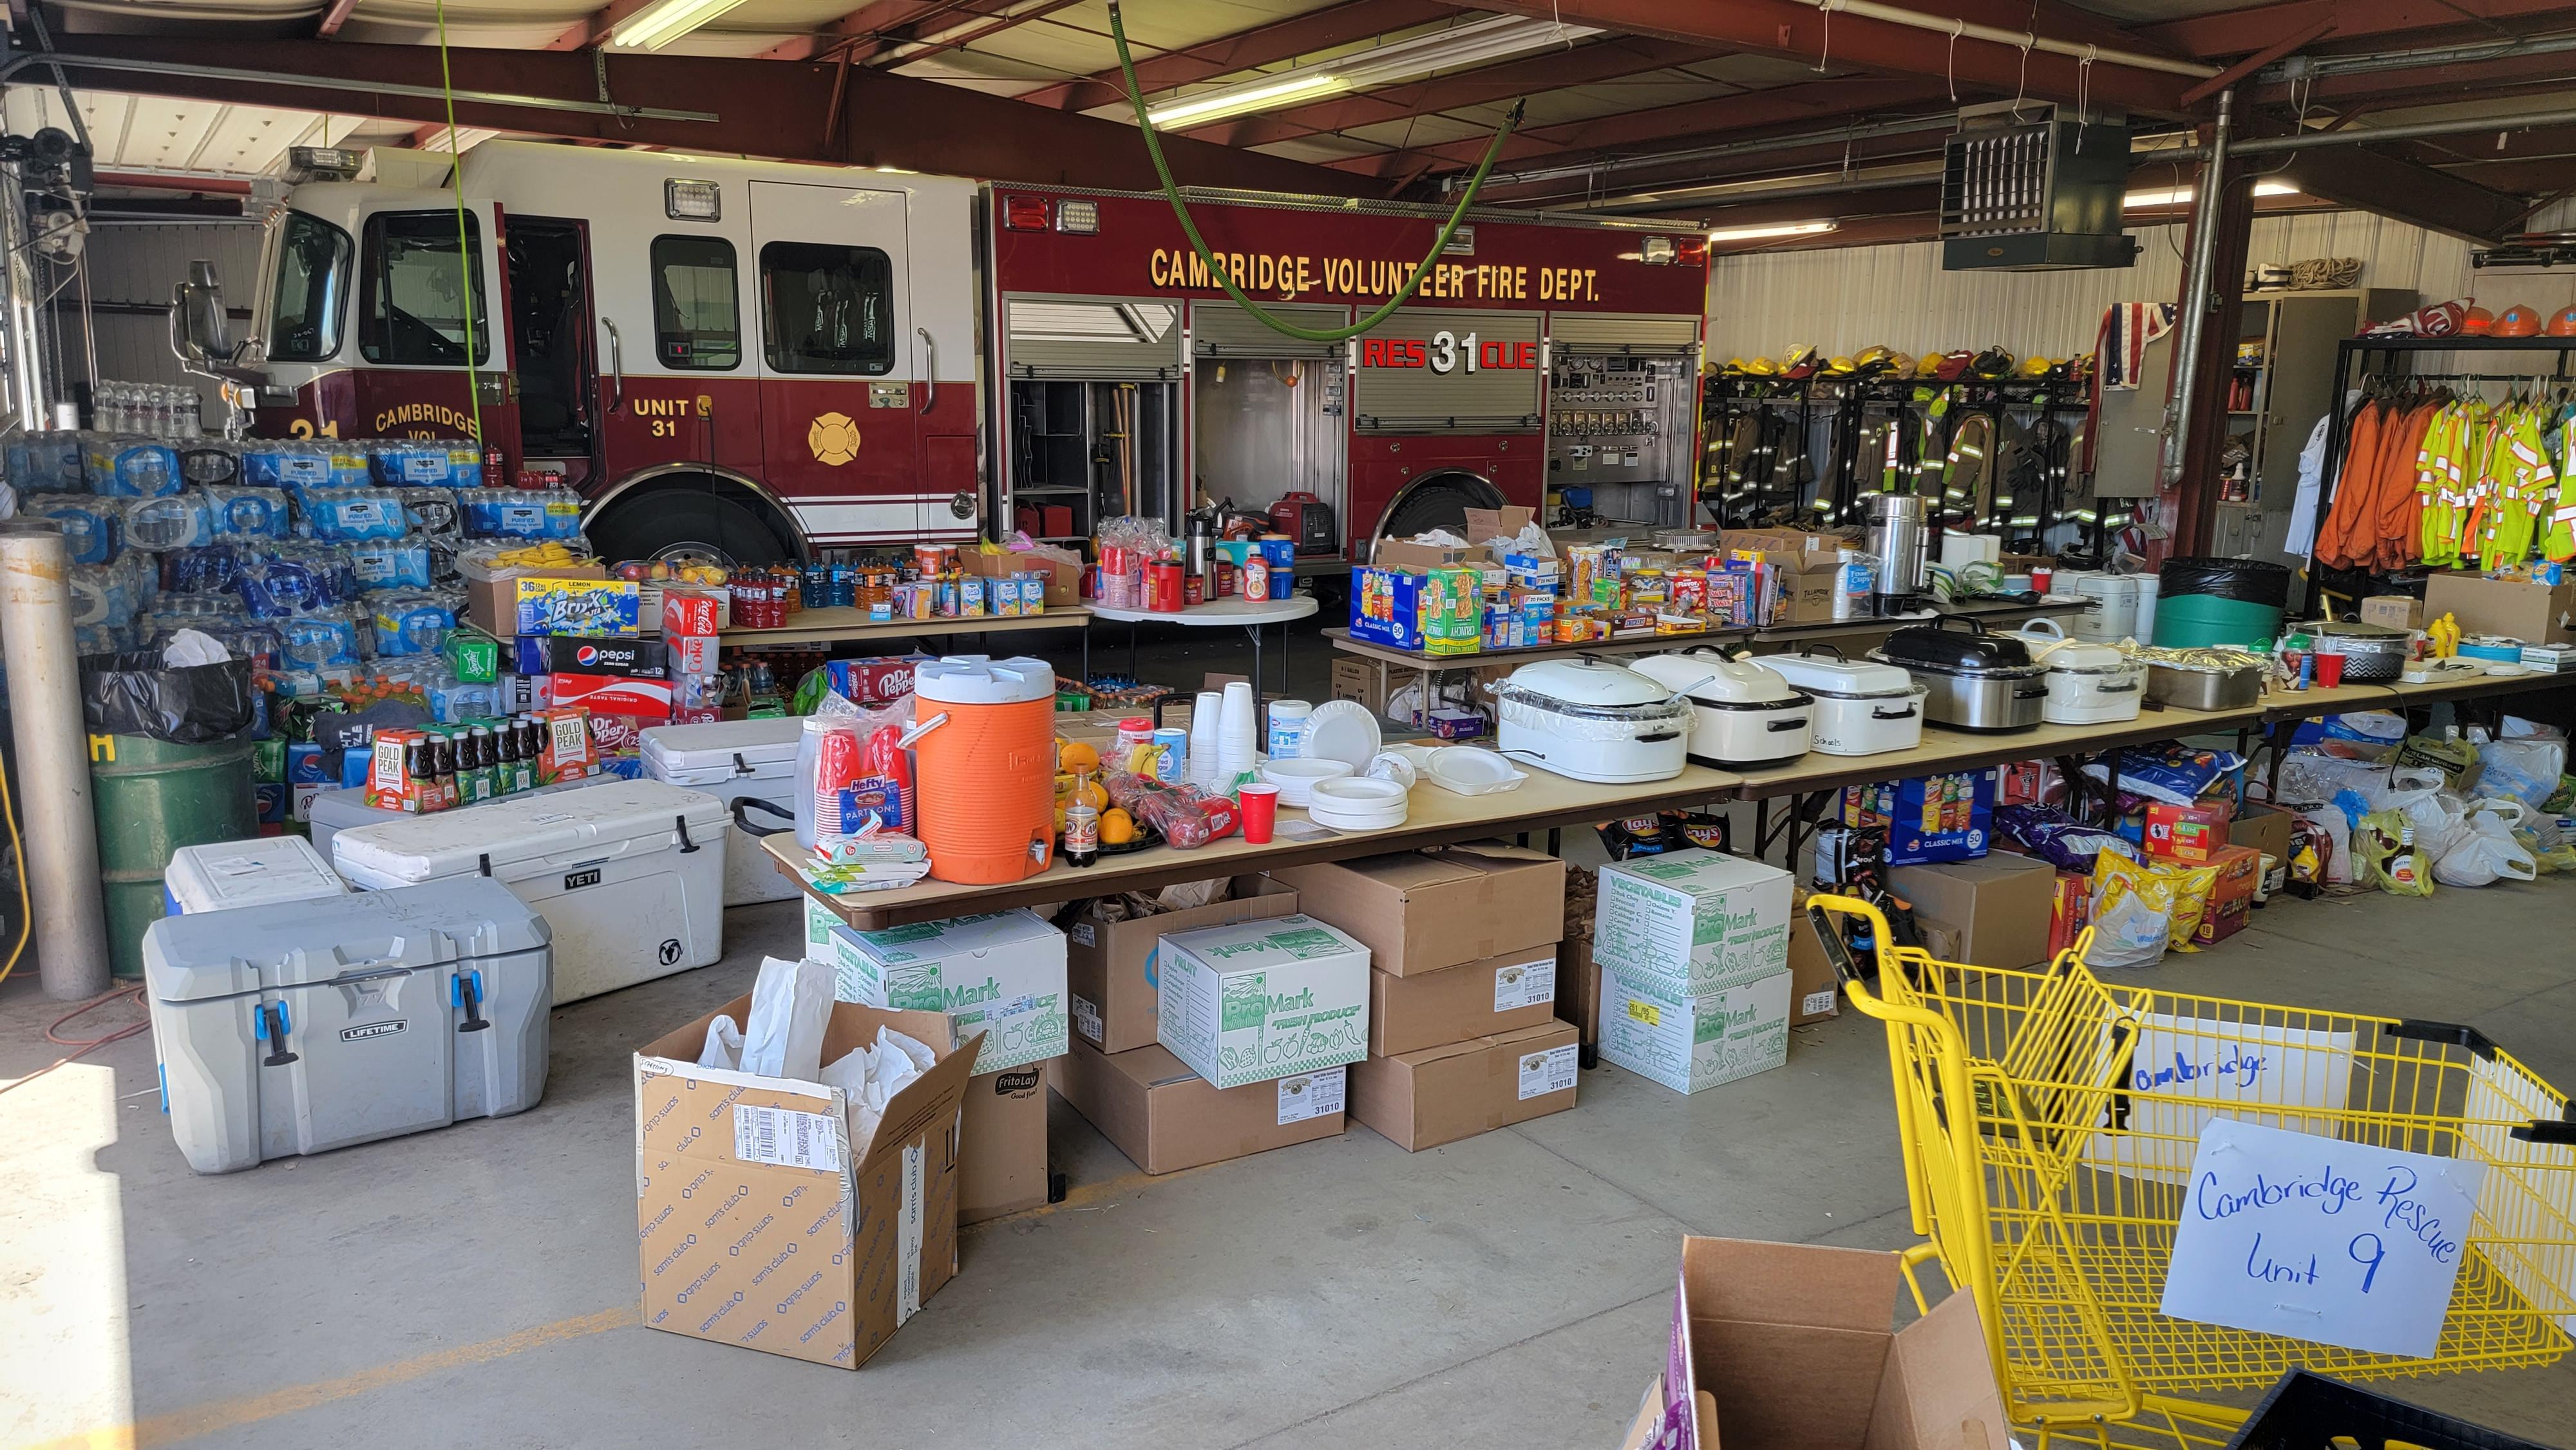 A very generous community effort is supporting the firefighters in the Cambridge area.